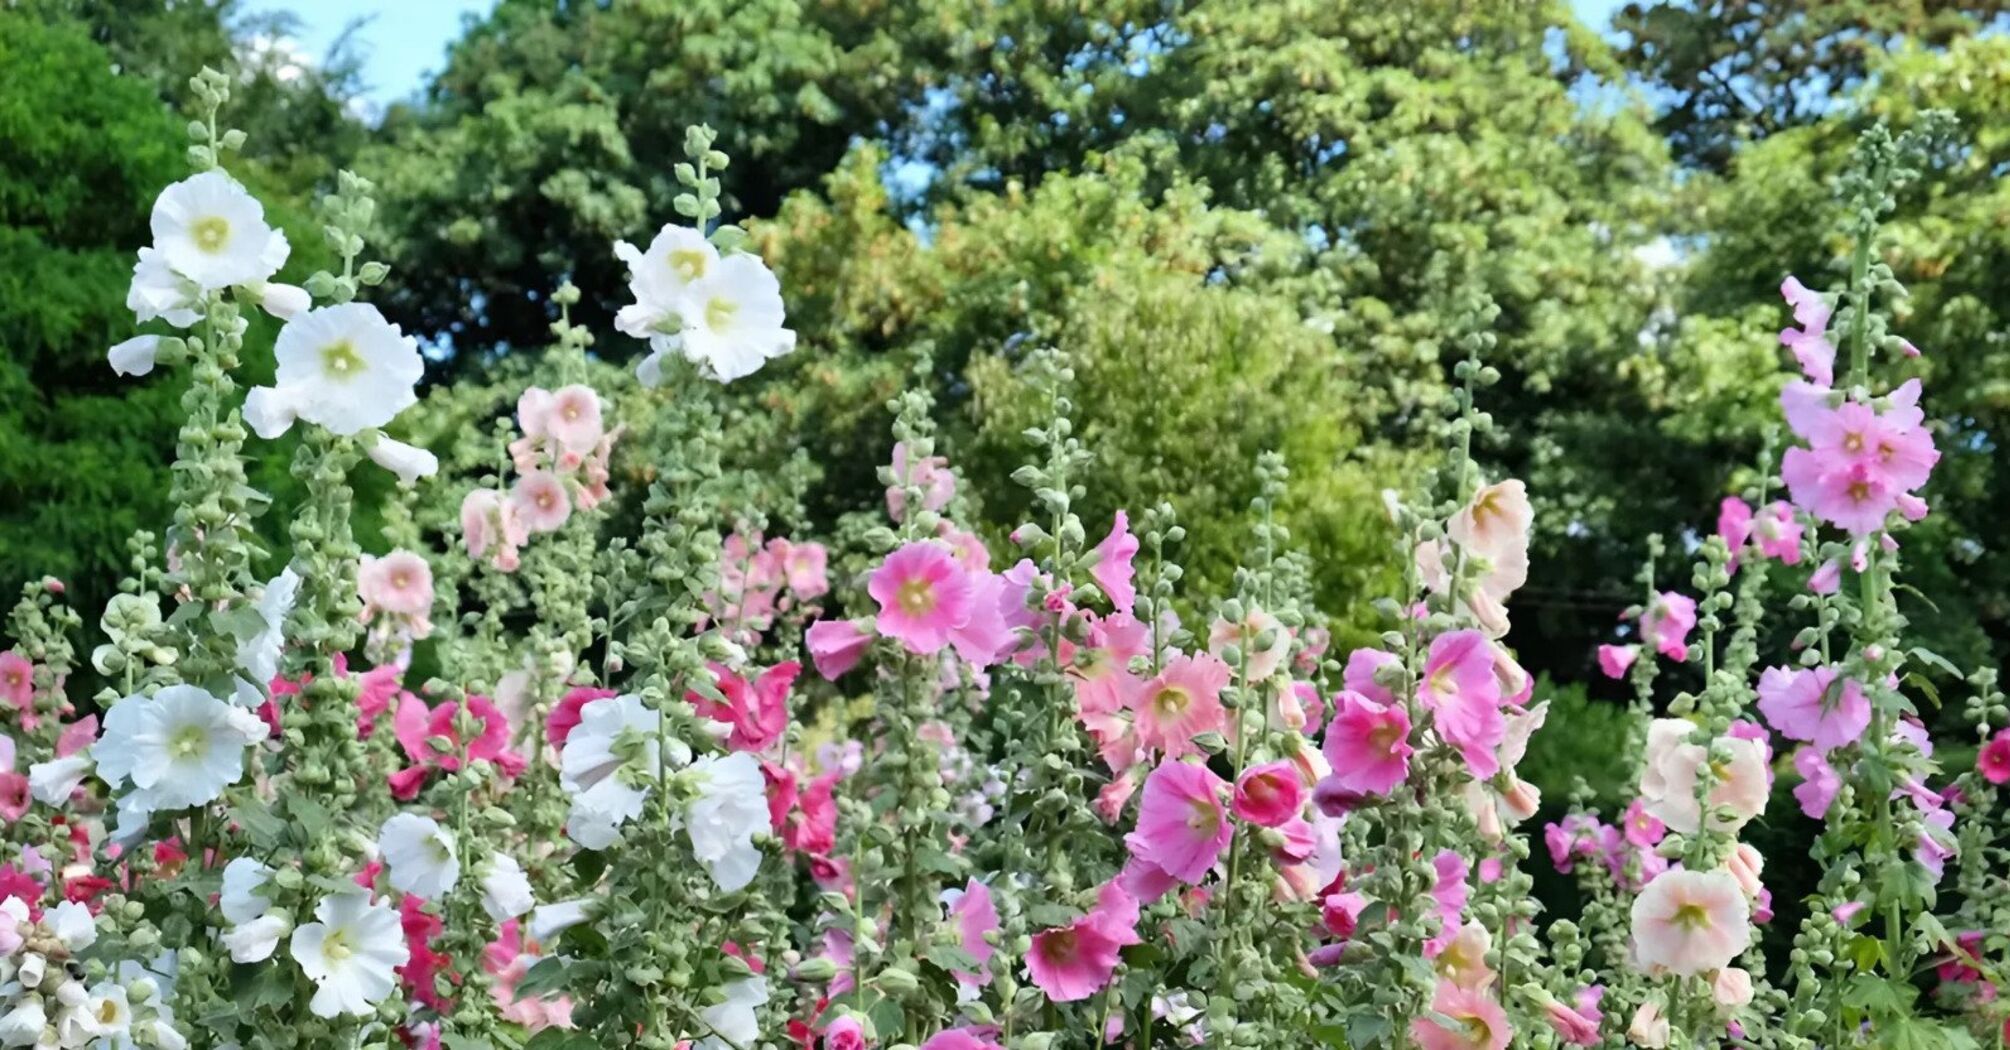 Ideal for a garden: how to properly care for hollyhocks